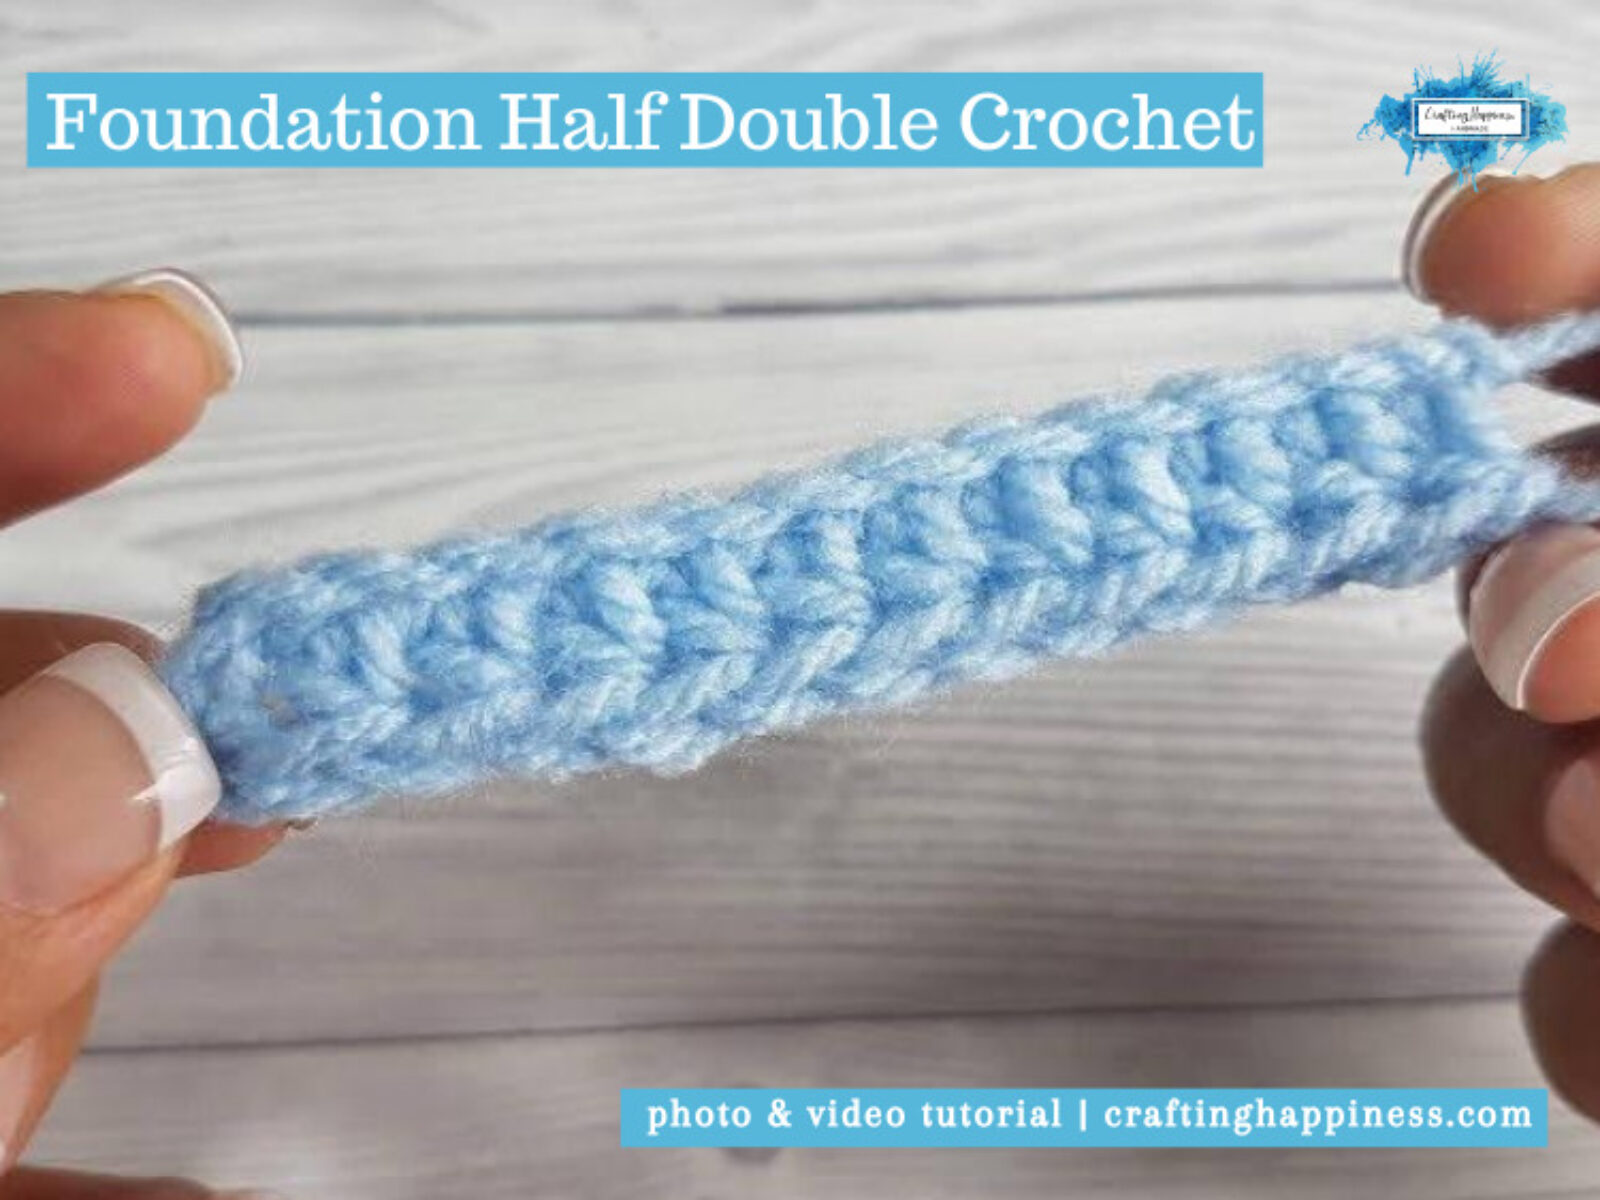 Foundation Half Double Crochet (FHDC) by Crafting Happiness FACEBOOK POSTER